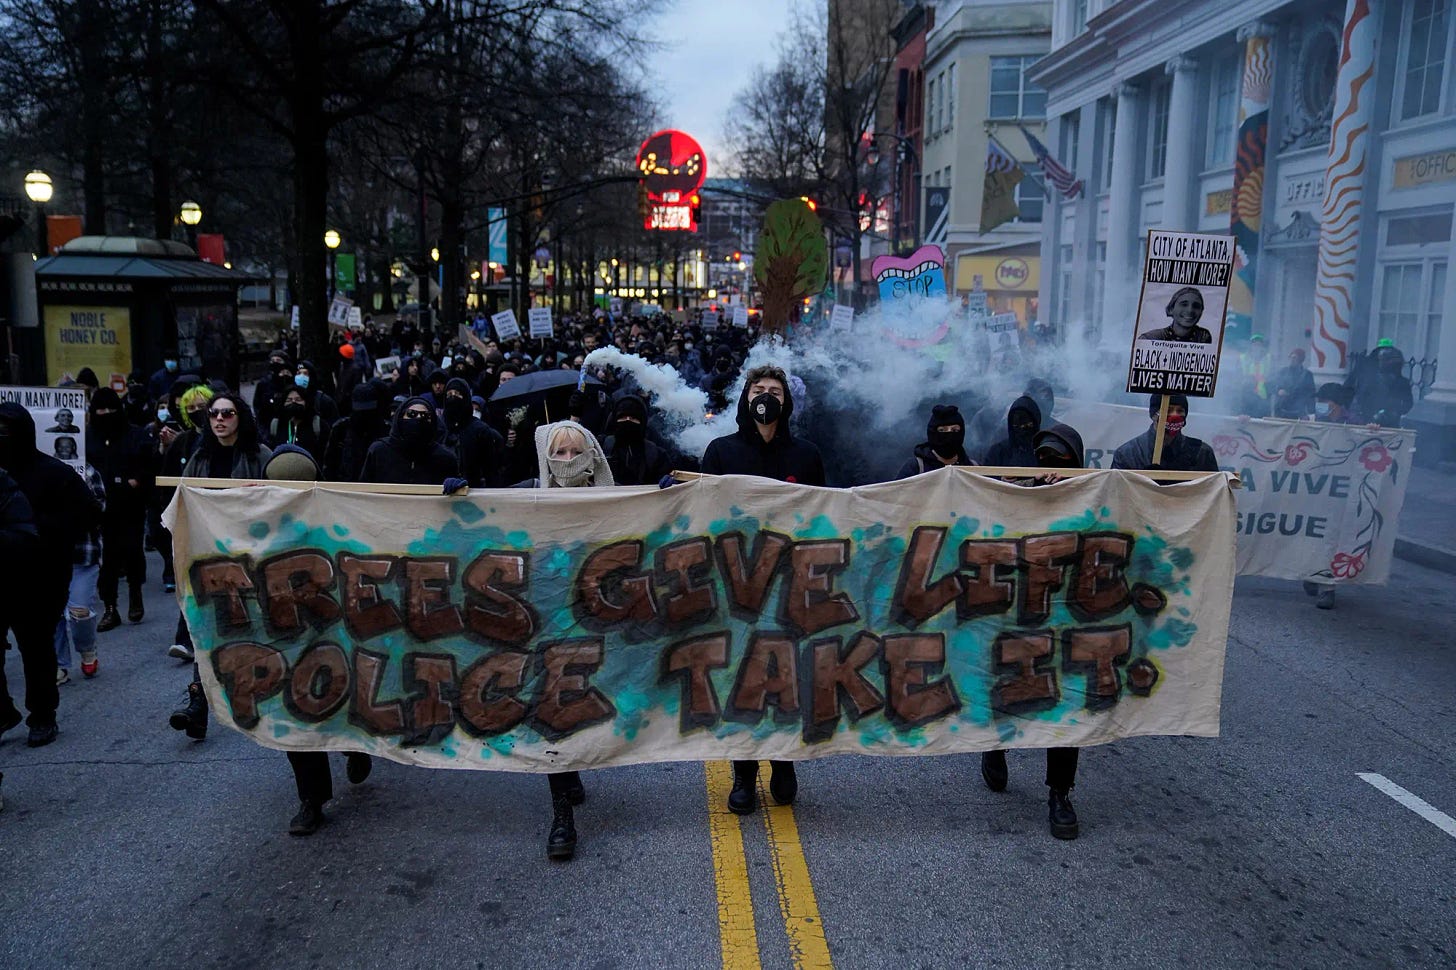 Protestors march in Atlanta on Saturday, Jan. 21, 2023, during demonstrations related to the death of Manuel Teran.